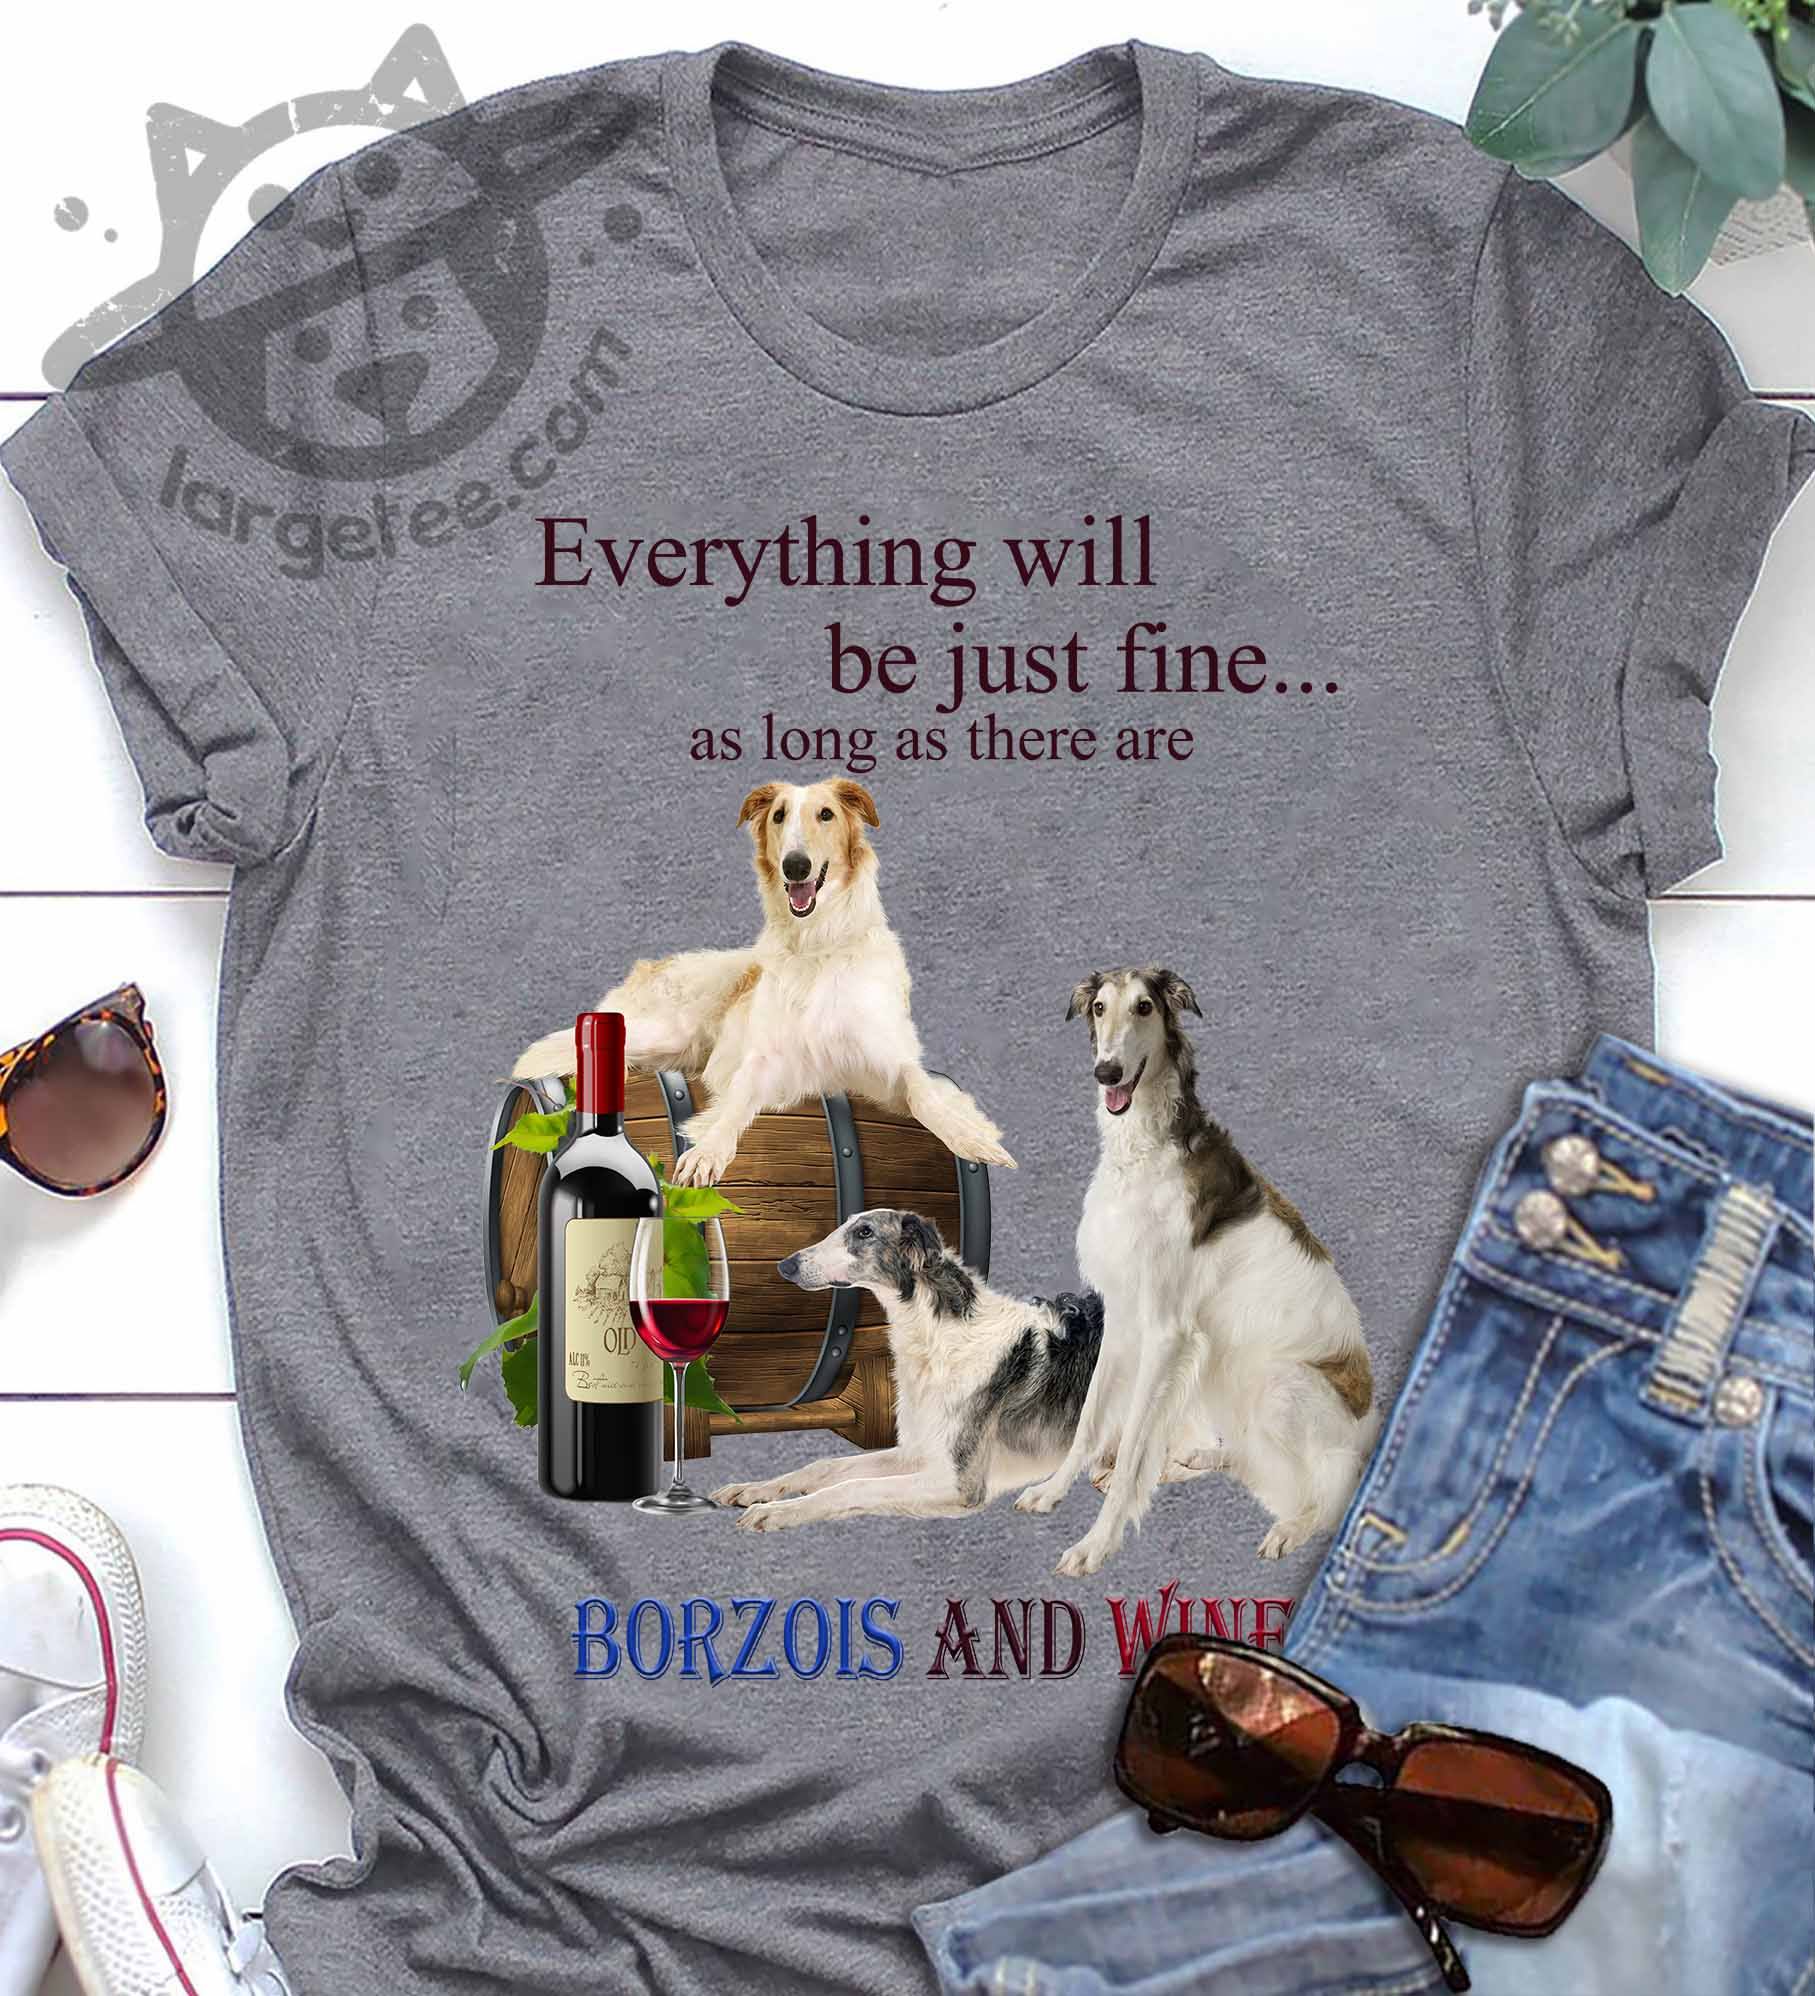 Everything will be just fine as long as there are Borzois and wine - Borzois dog